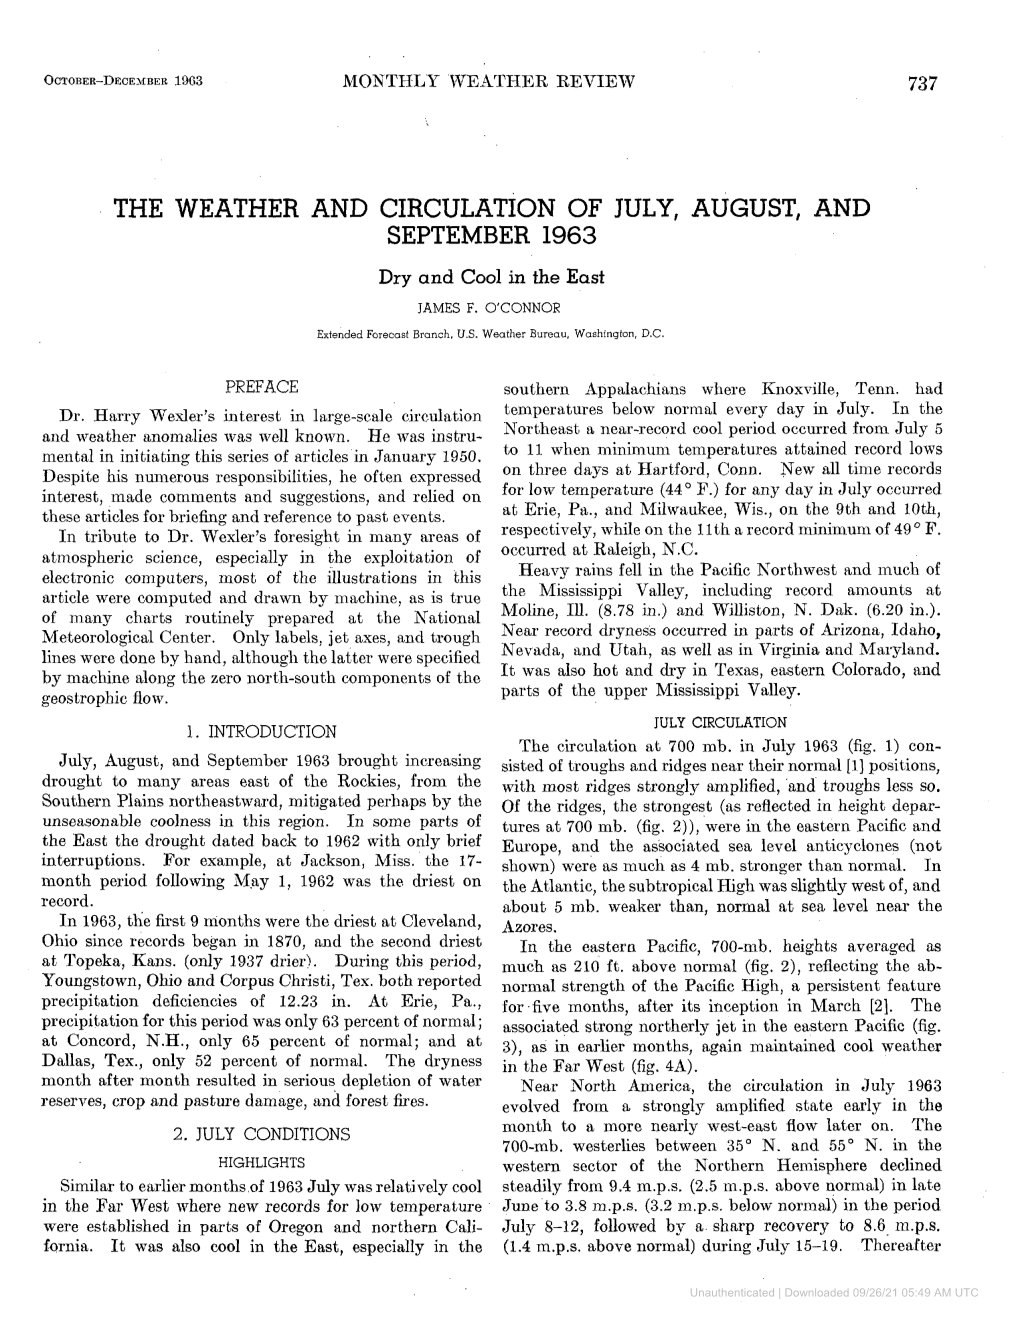 Downloaded 09/26/21 05:49 AM UTC 738 MONTHLY WEATHER REVIEW OCTOBER-DECEMBER1963